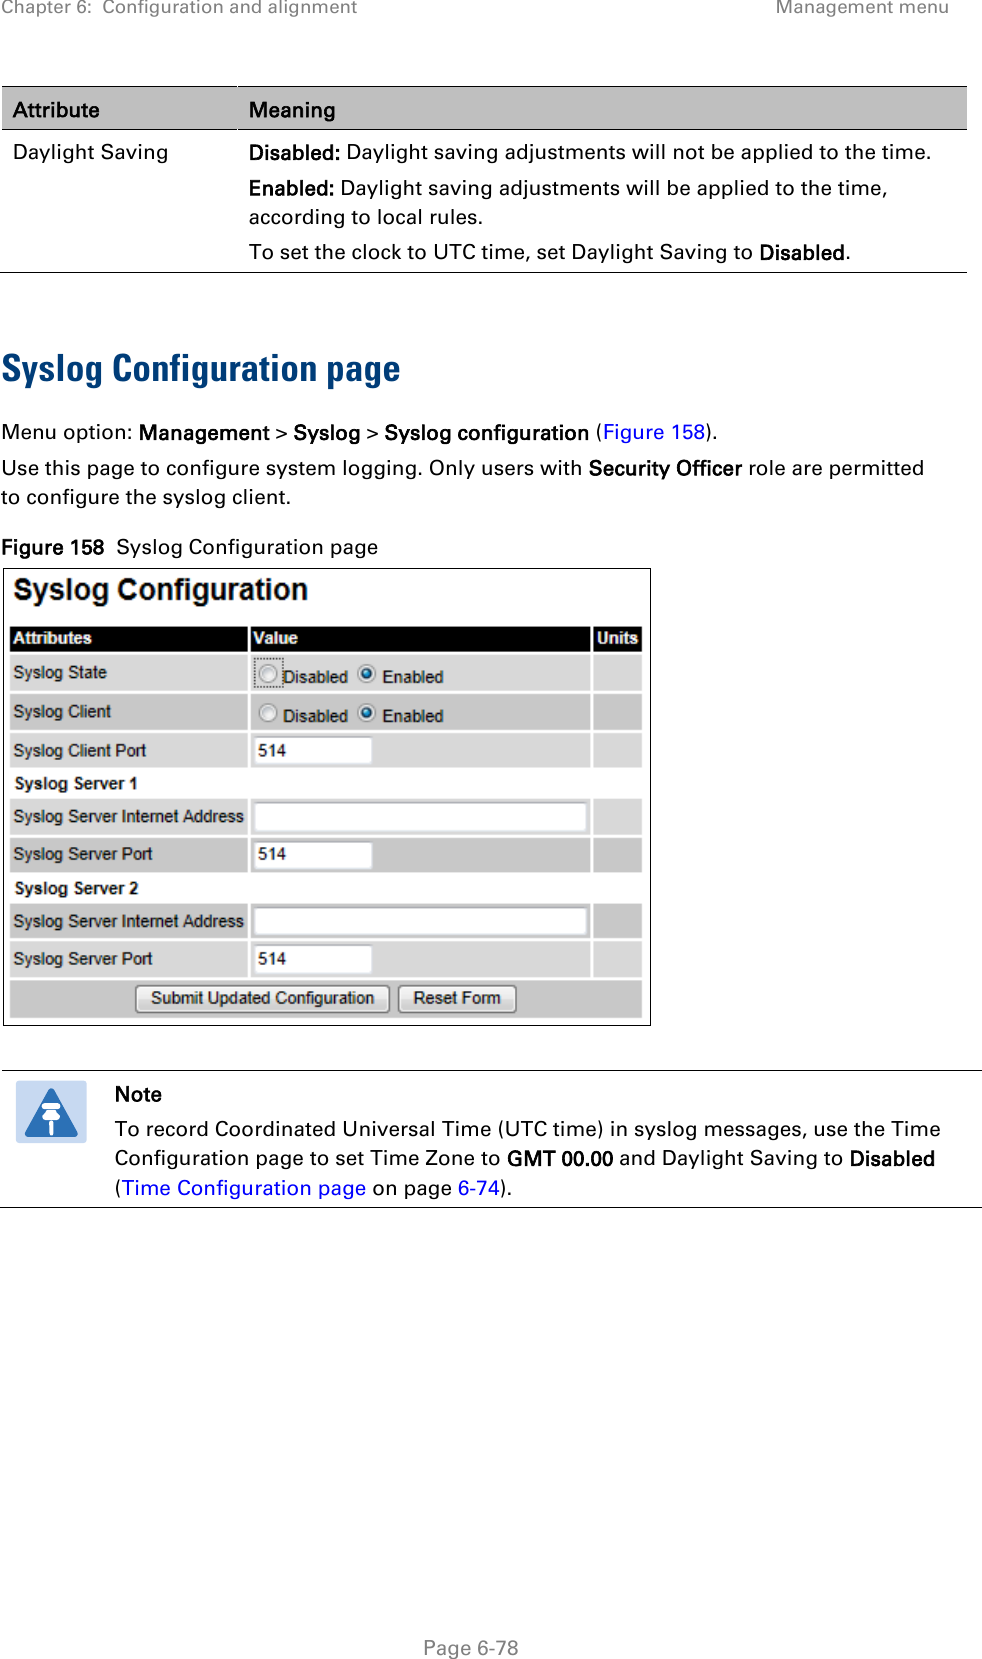 Chapter 6:  Configuration and alignment Management menu  Attribute Meaning Daylight Saving Disabled: Daylight saving adjustments will not be applied to the time. Enabled: Daylight saving adjustments will be applied to the time, according to local rules.  To set the clock to UTC time, set Daylight Saving to Disabled.  Syslog Configuration page Menu option: Management &gt; Syslog &gt; Syslog configuration (Figure 158). Use this page to configure system logging. Only users with Security Officer role are permitted to configure the syslog client. Figure 158  Syslog Configuration page    Note To record Coordinated Universal Time (UTC time) in syslog messages, use the Time Configuration page to set Time Zone to GMT 00.00 and Daylight Saving to Disabled (Time Configuration page on page 6-74).     Page 6-78 